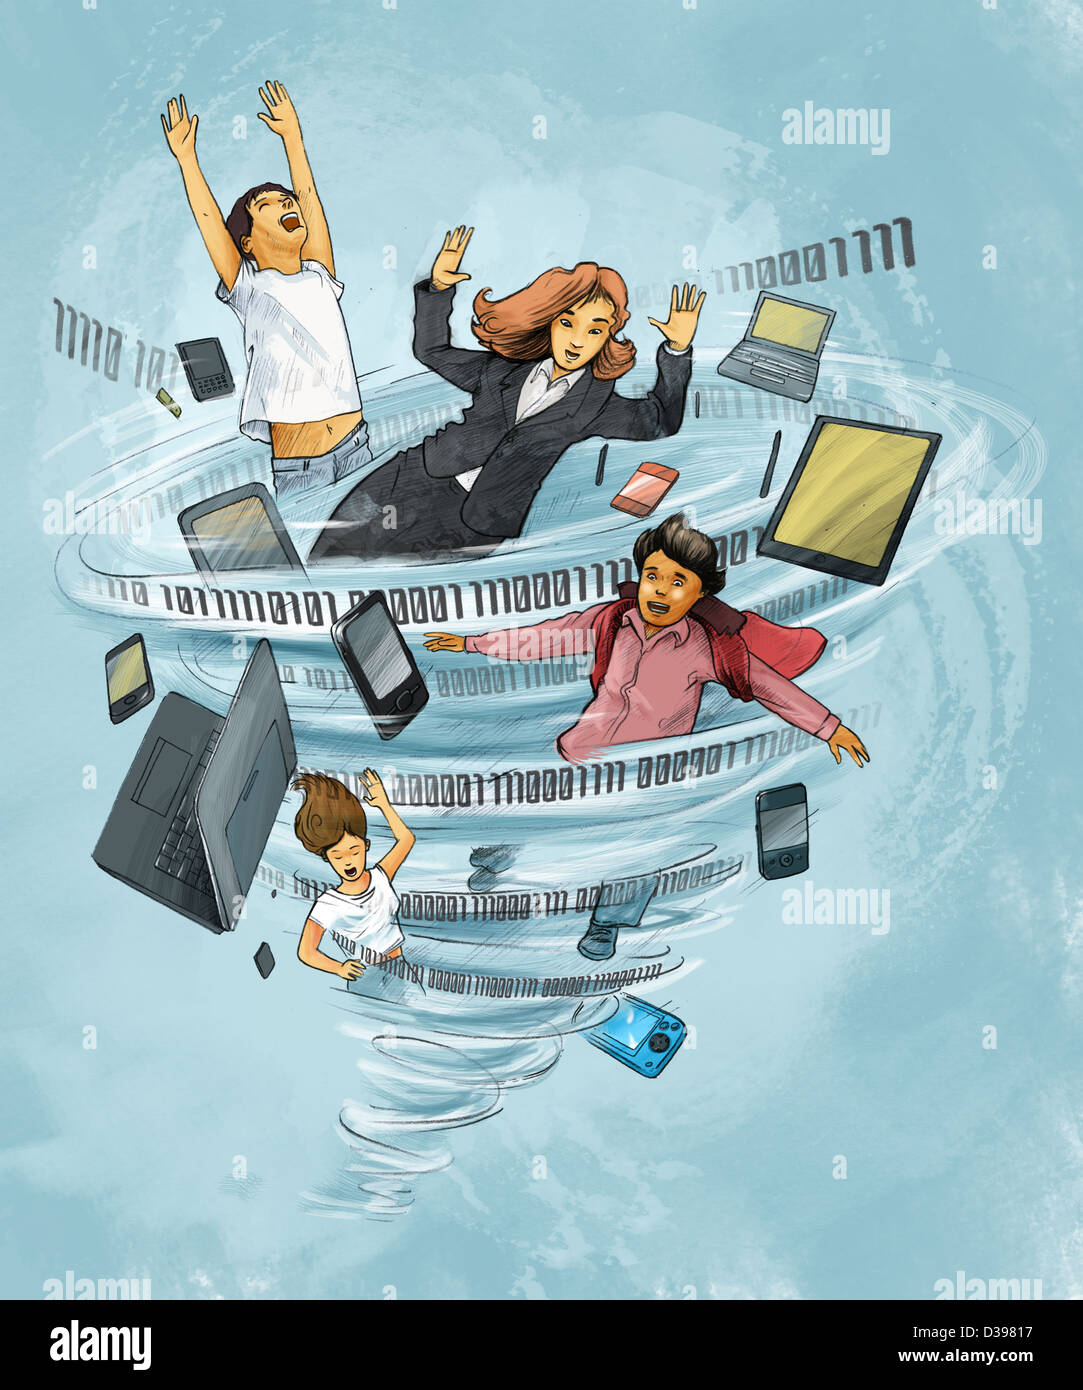 People with laptop and mobile phones trapped in twister depicting internet addiction Stock Photo